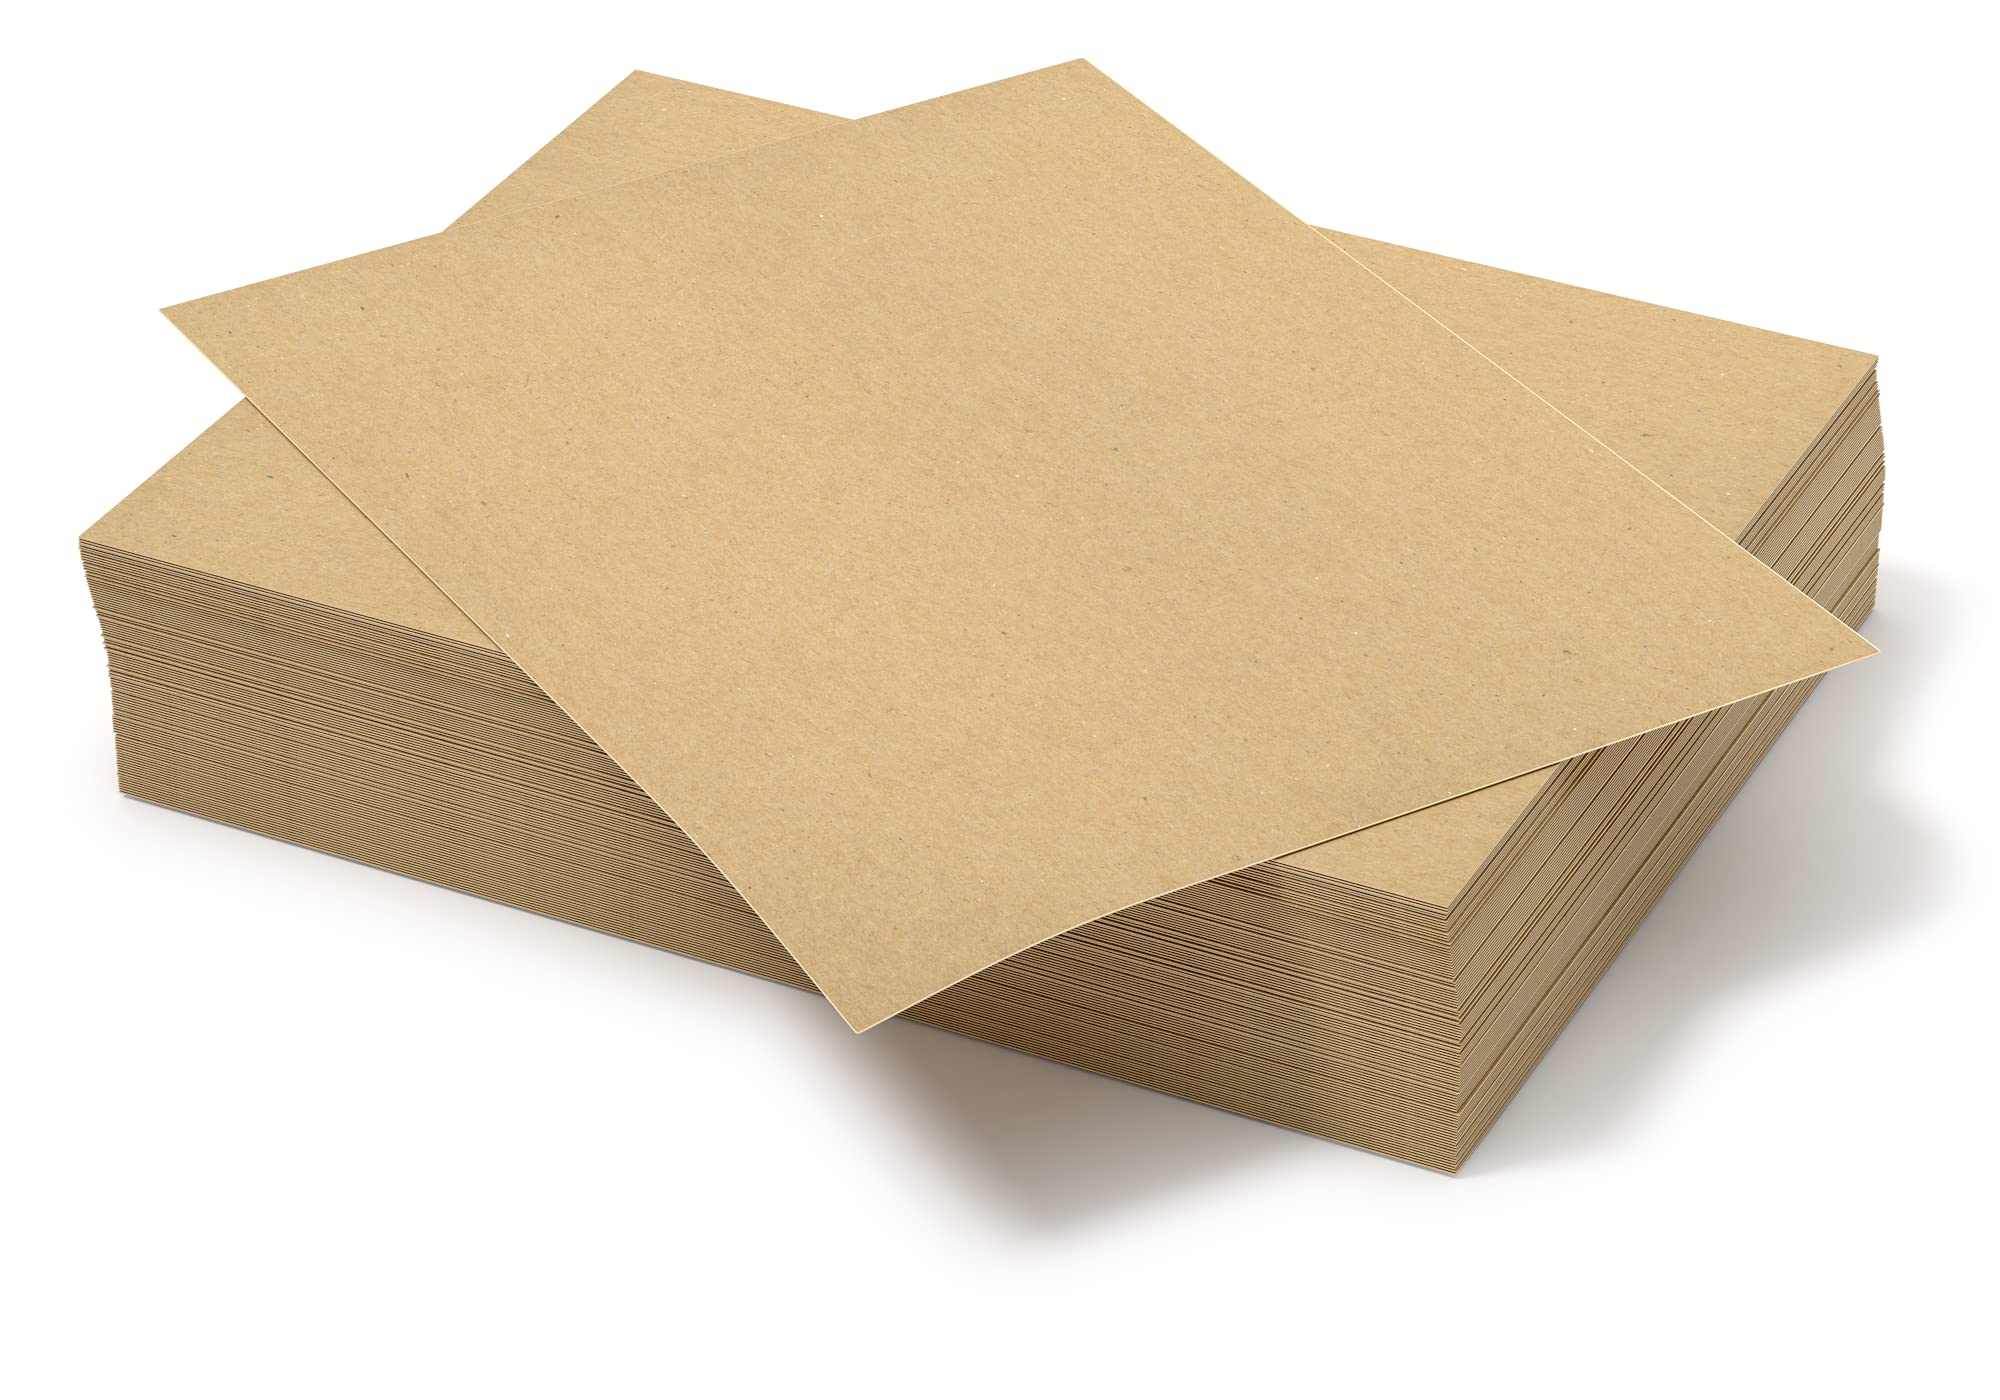 Packing Paper Sheets for Moving - 15lb - 480 Sheets of Newsprint